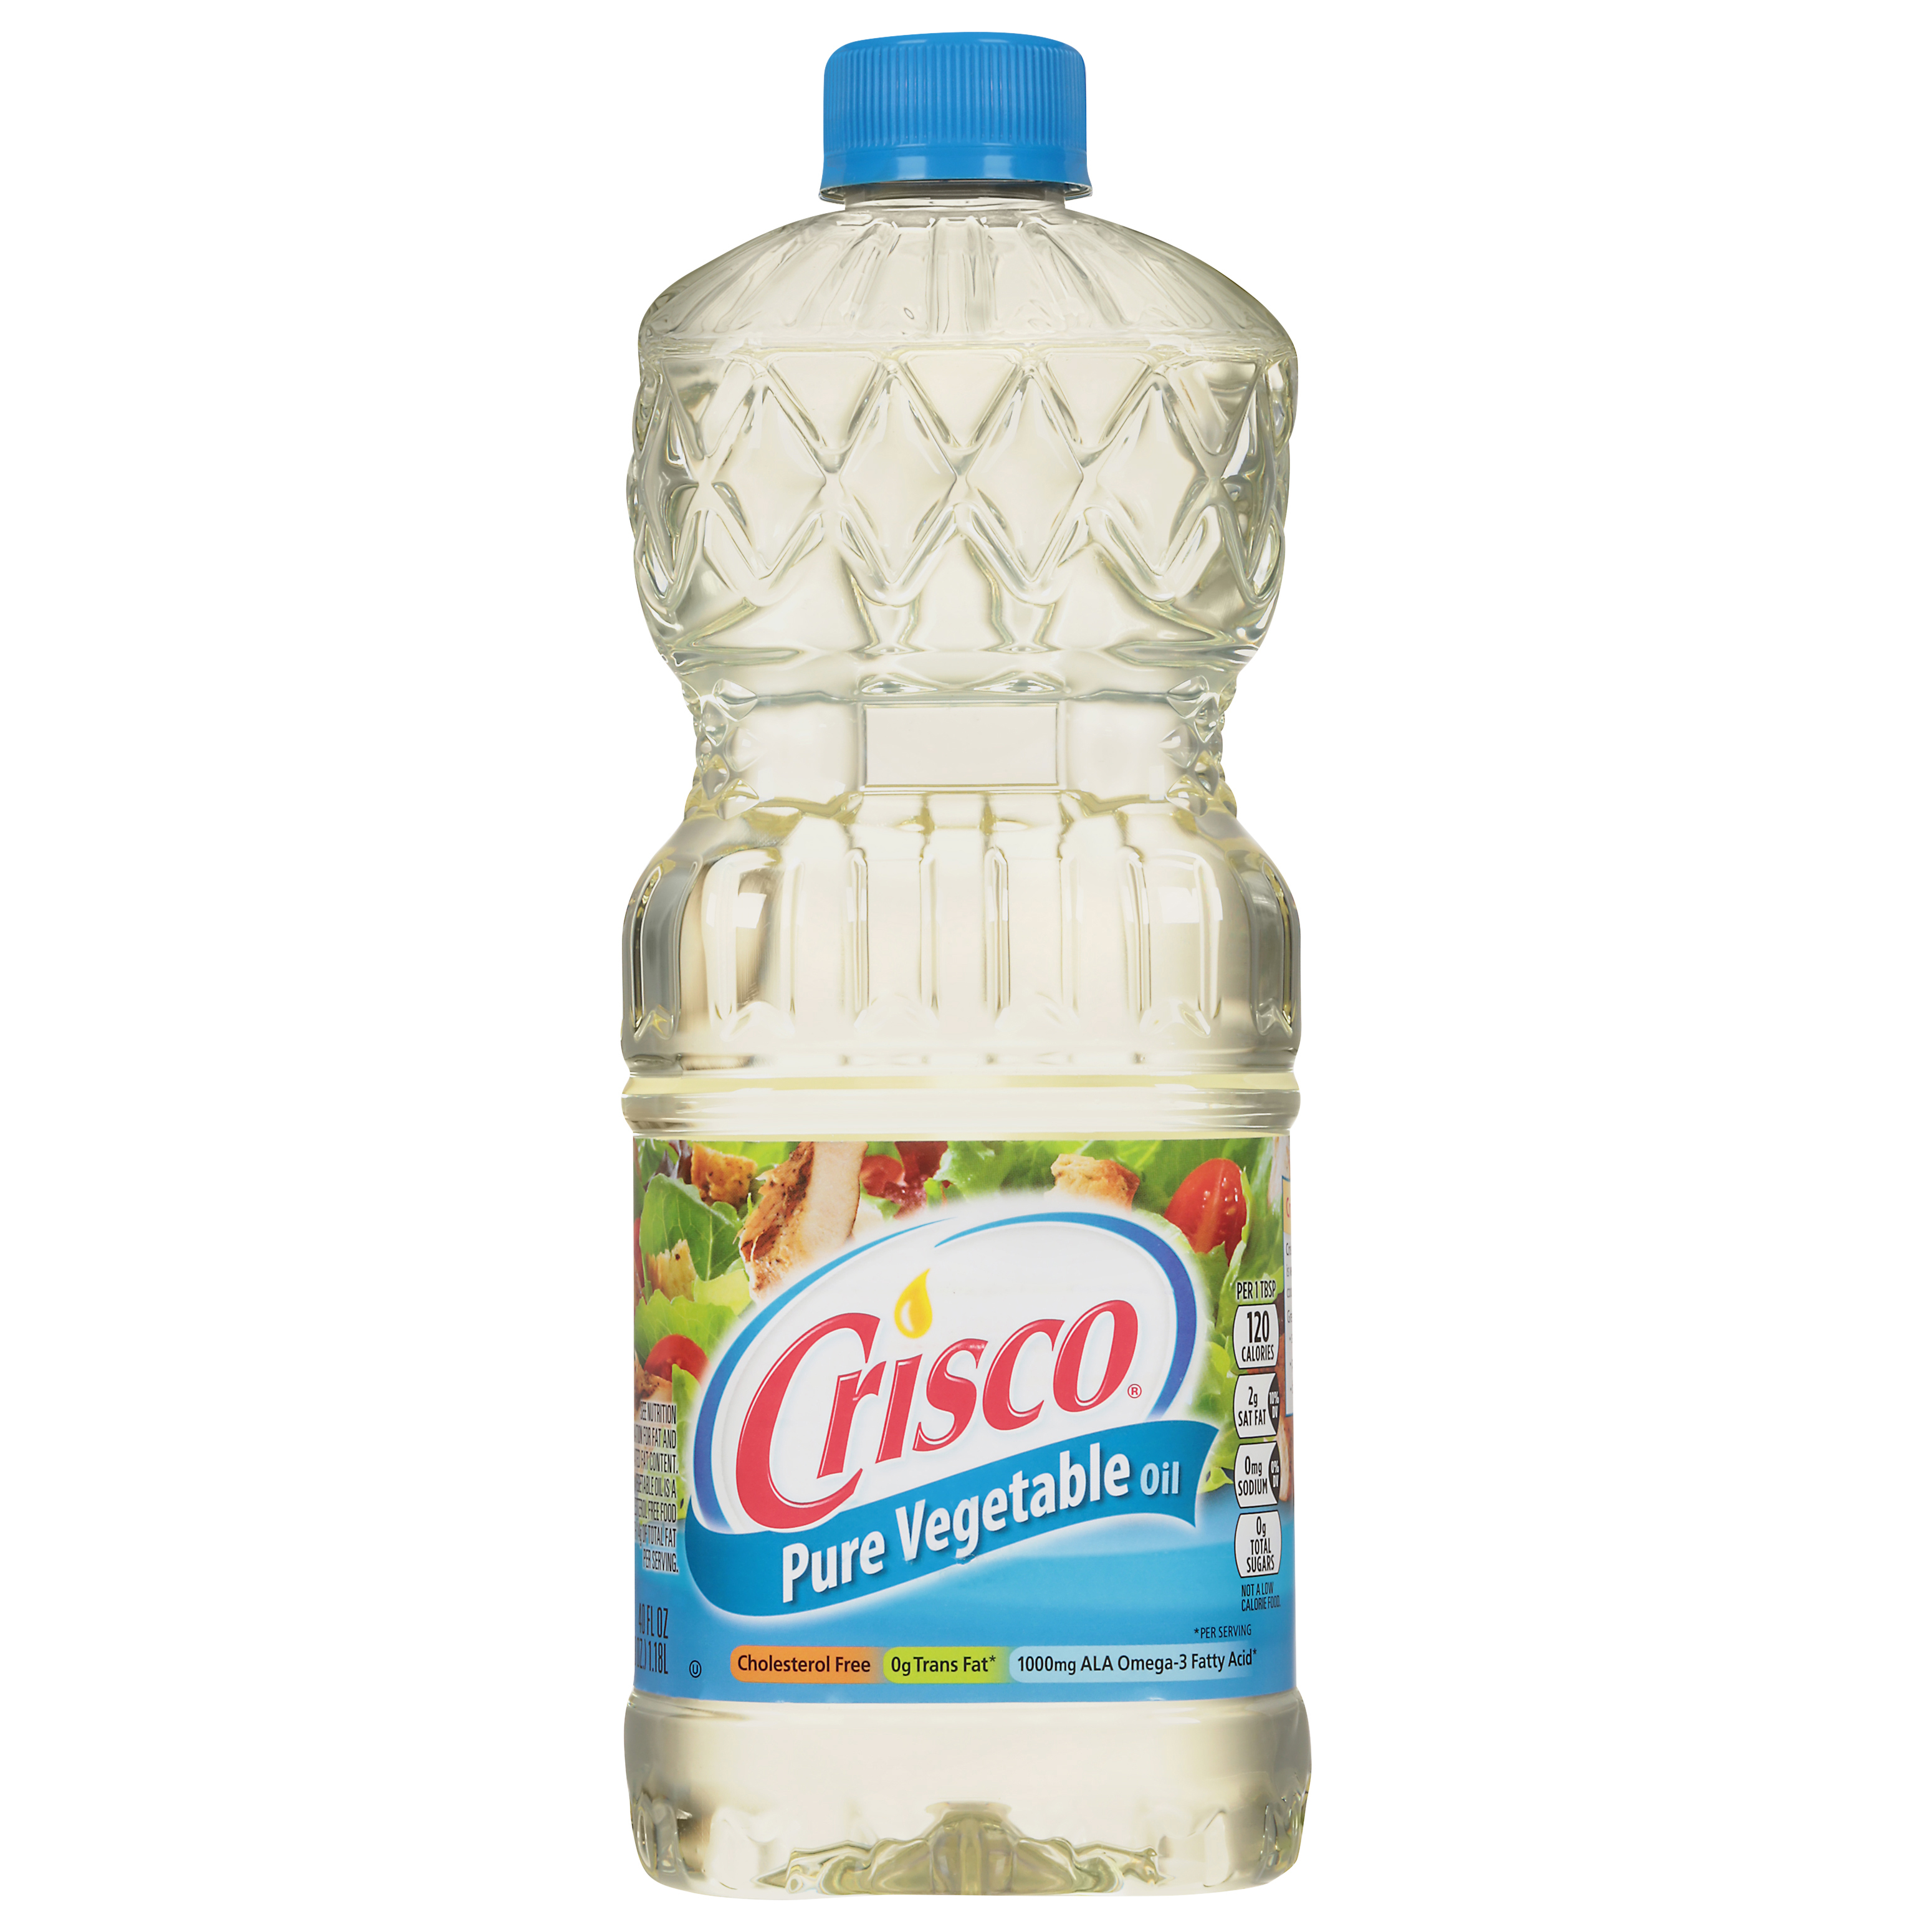 Crisco Pure Vegetable Cooking Oil, 40 fl oz - image 2 of 11